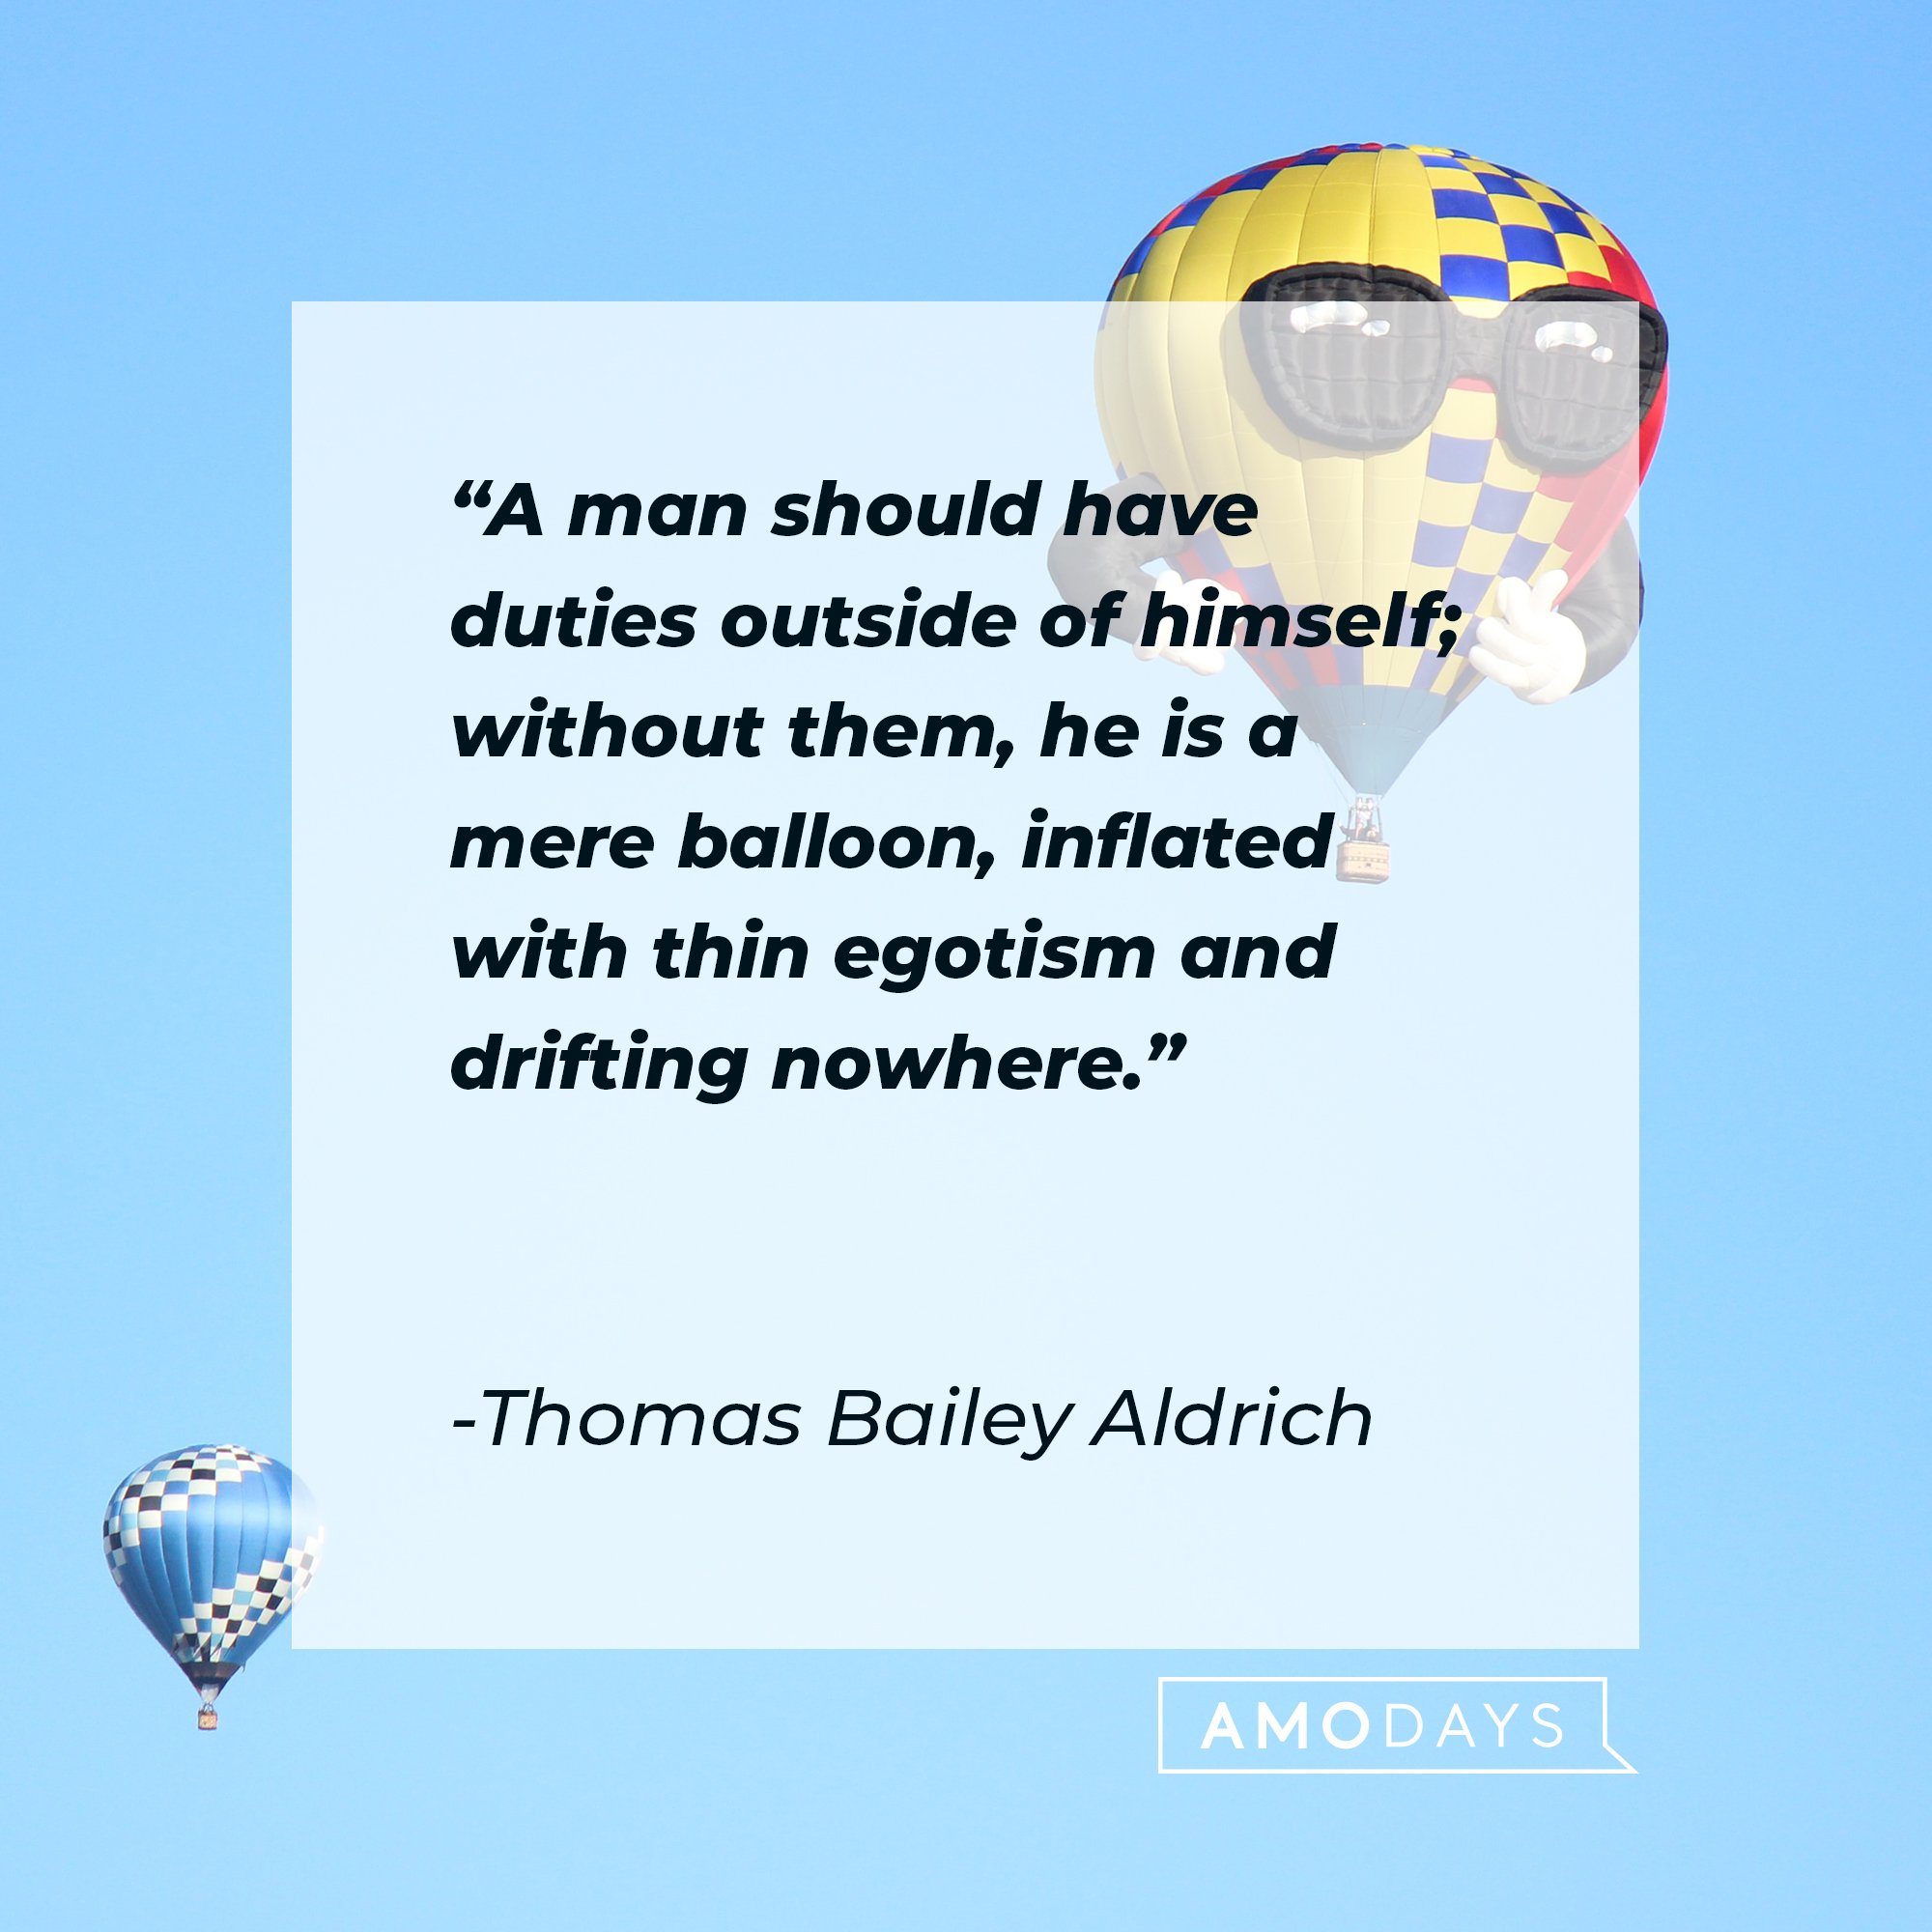 Thomas Bailey Aldrich’s quote: "A man should have duties outside of himself; without them, he is a mere balloon, inflated with thin egotism and drifting nowhere." | Image: AmoDays 